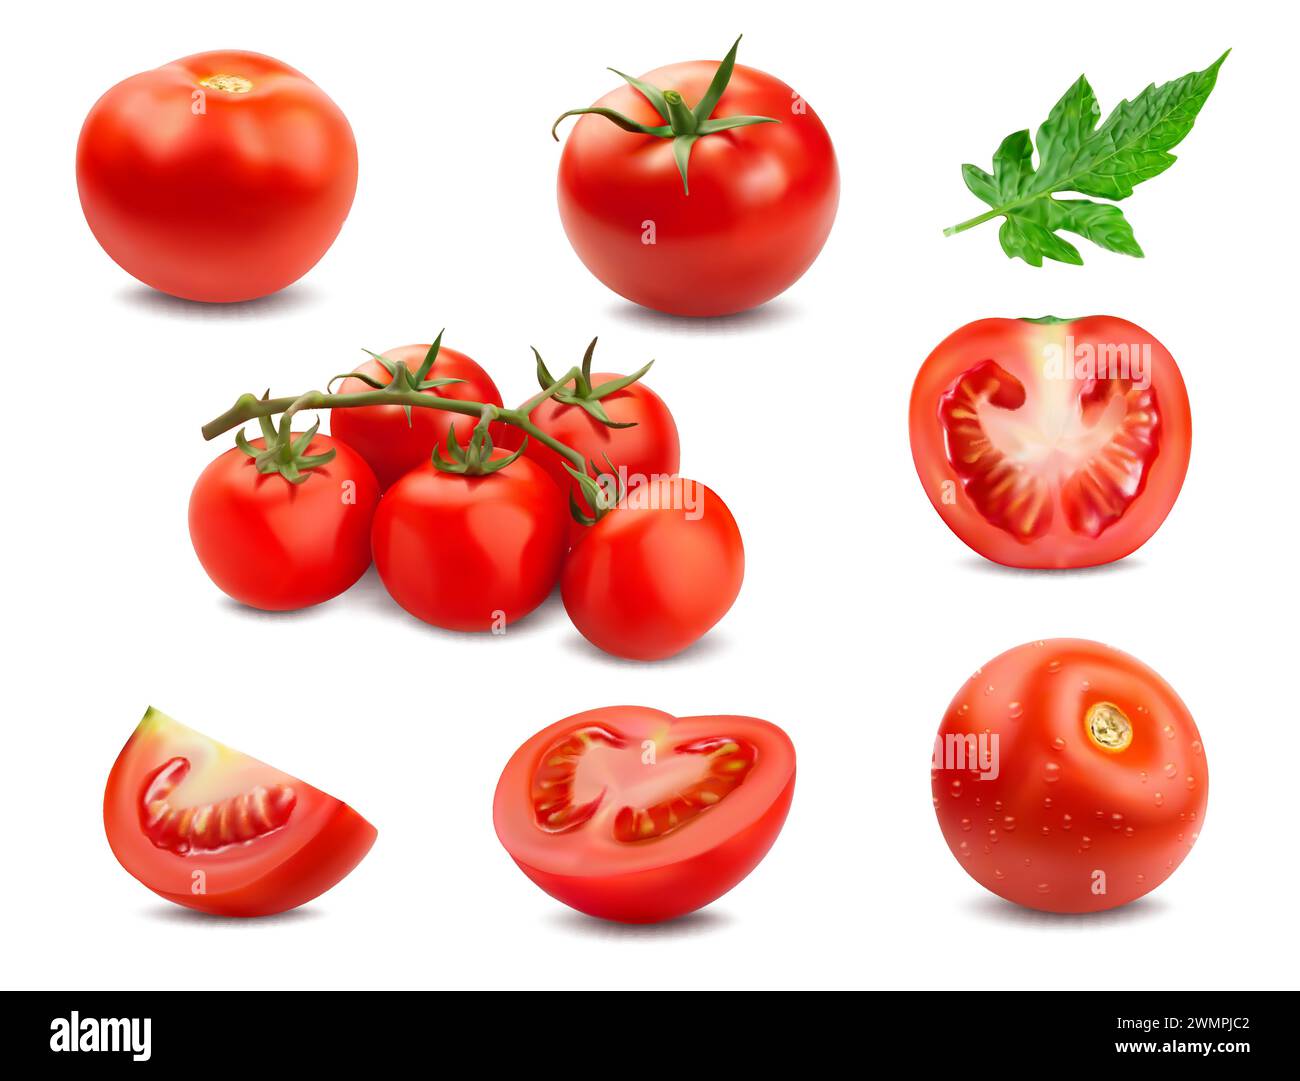 Realistic ripe raw tomato, half and slices. Isolated 3d vector vibrant and plump pomodoro cherries, showcasing a vivid red hue, reveals juicy seeds and flesh, exude freshness and natural texture Stock Vector